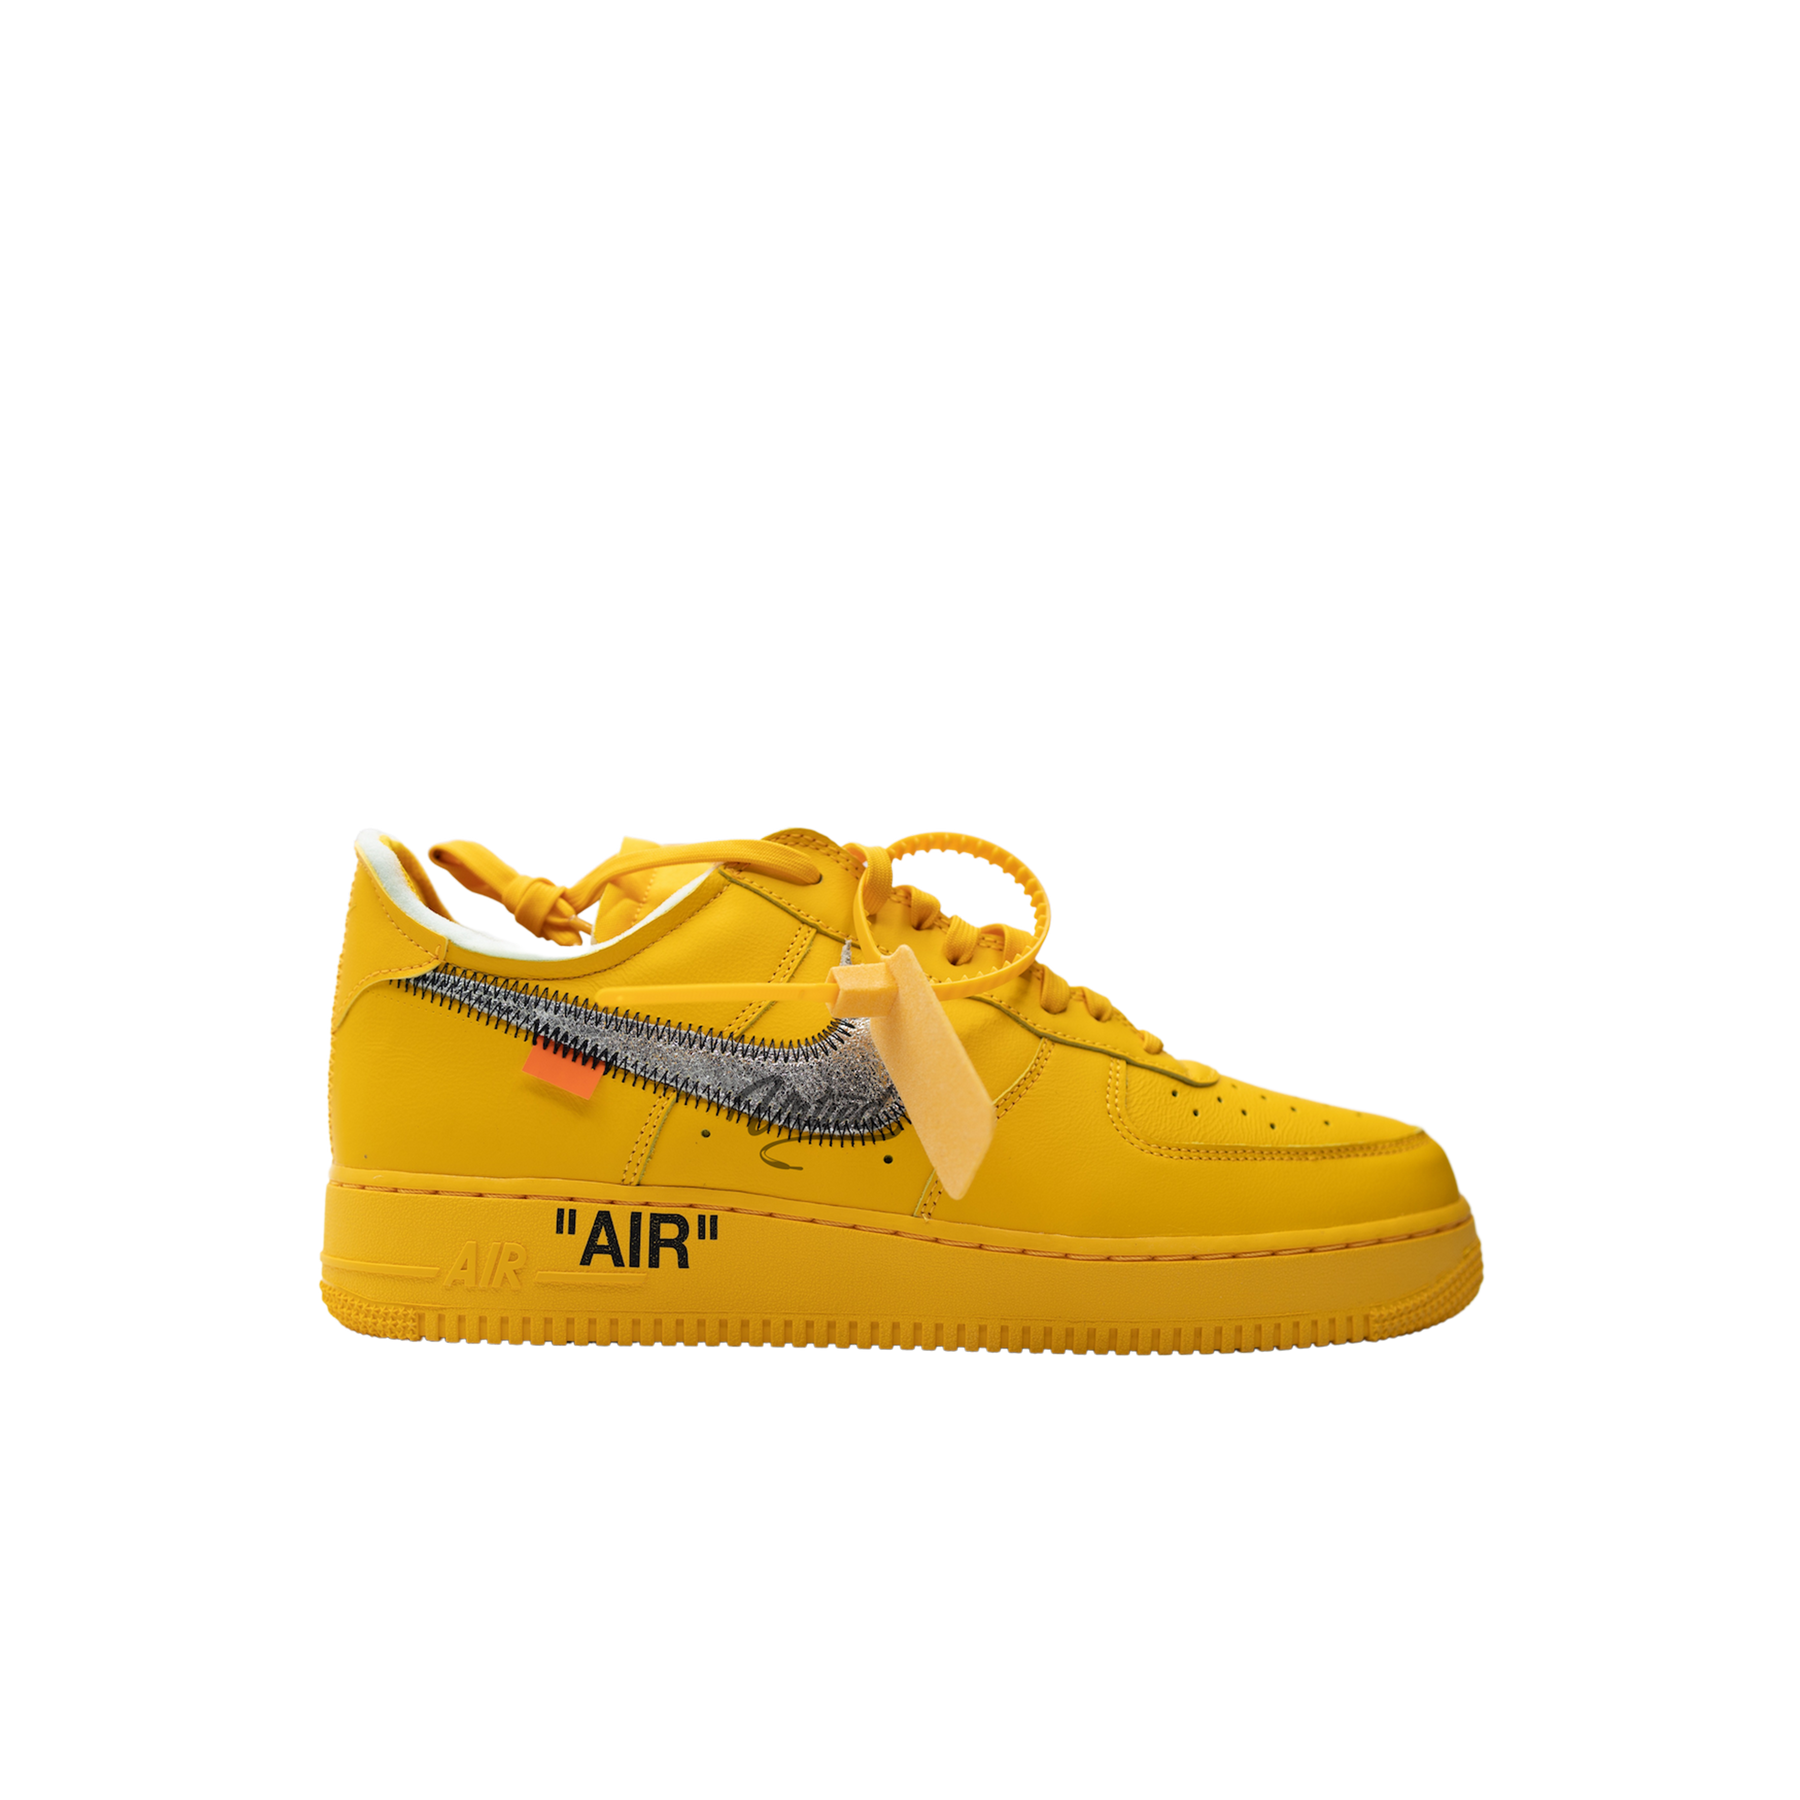 Off-White Nike Air Force 1 "University Gold"